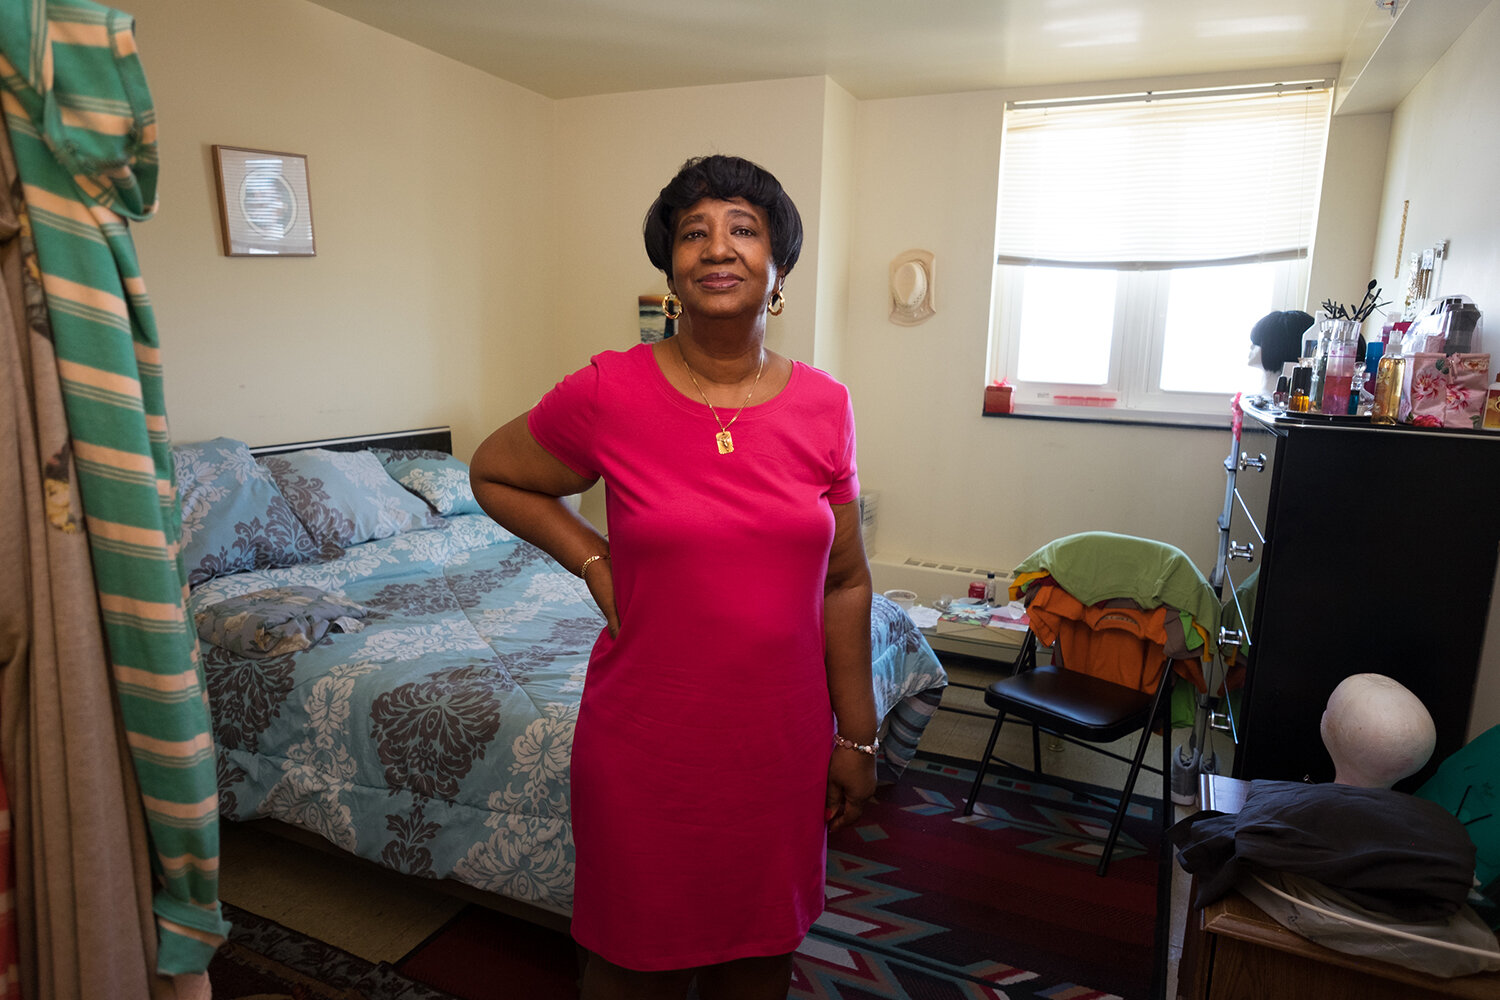  Linda, 70, in her own apartment 14 years after her release. Albany, NY, 2017. Image © Sara Bennett. 